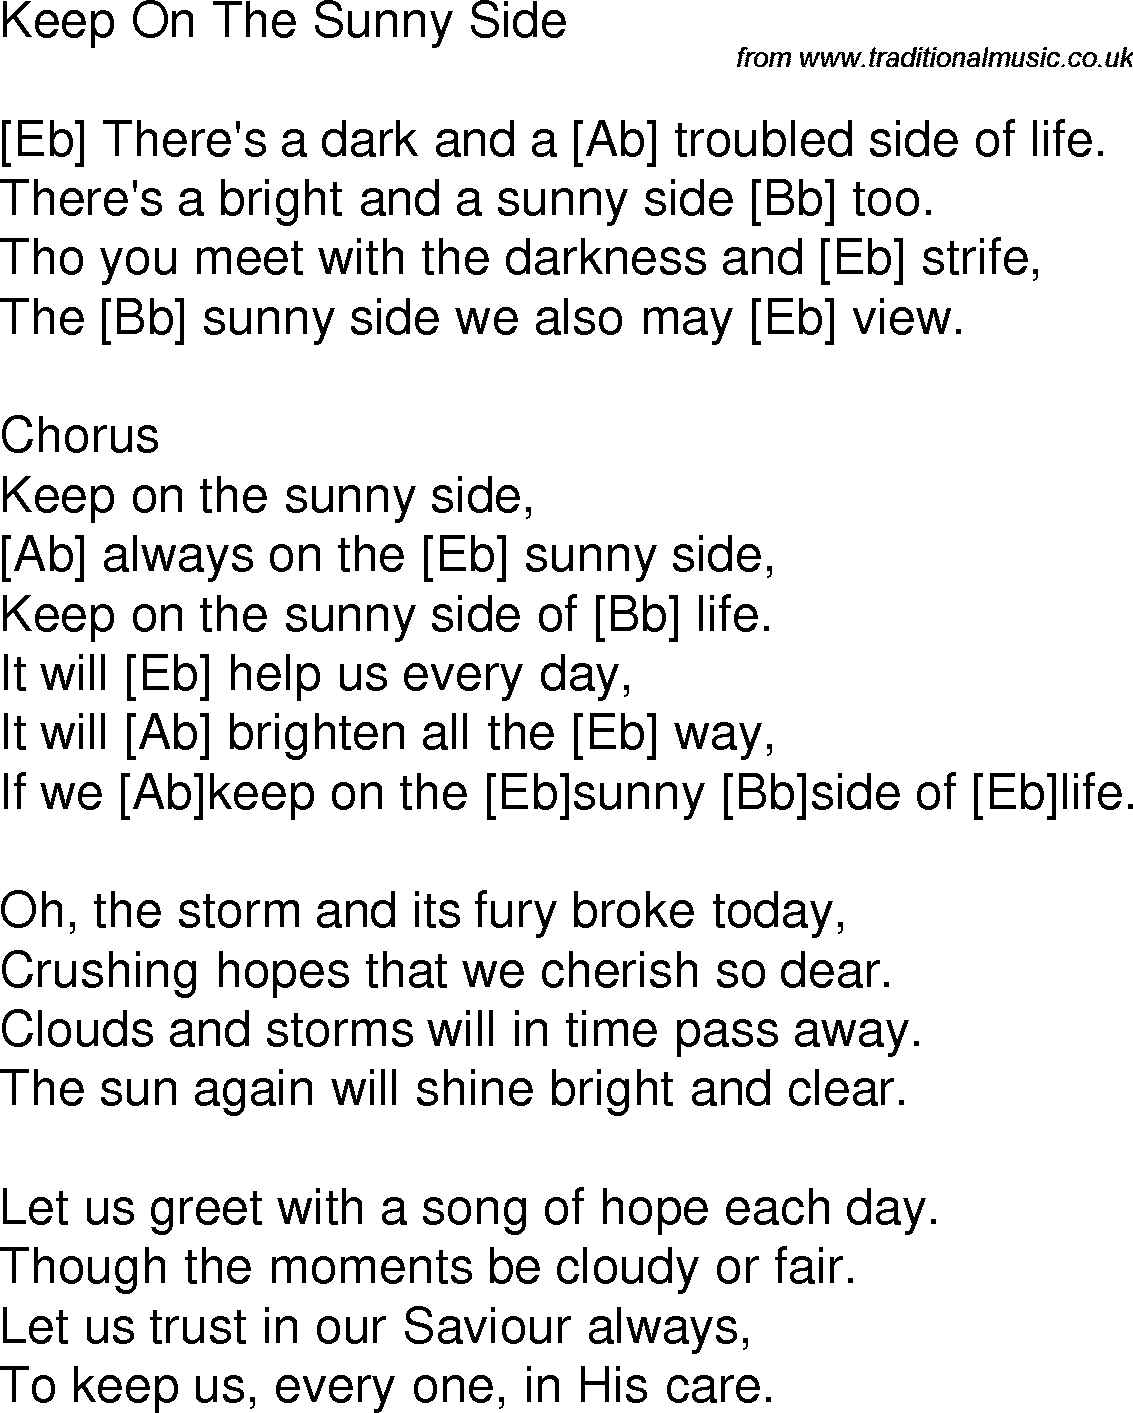 Old time song lyrics with chords for Keep On The Sunny Side Eb